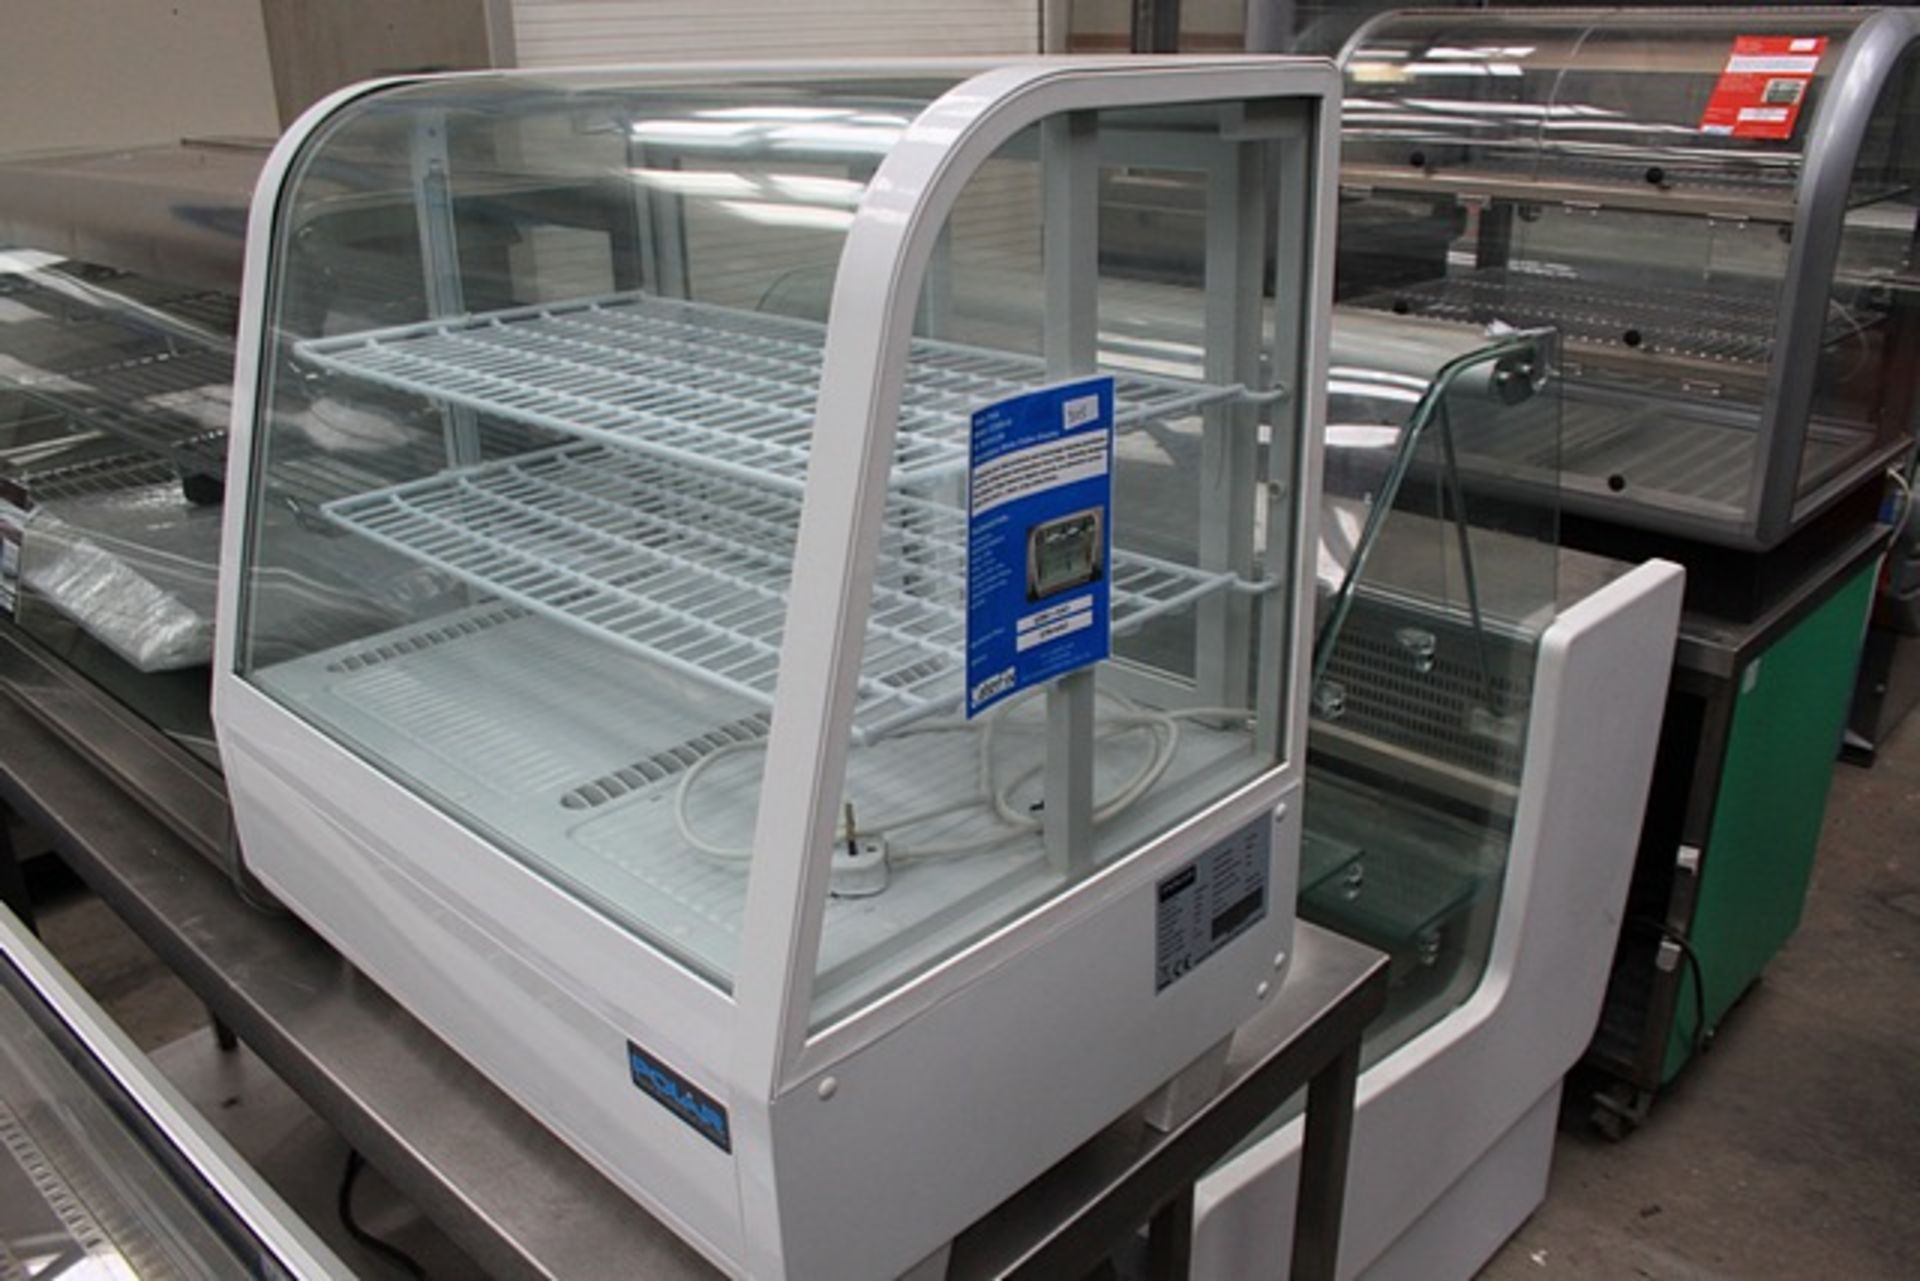 Polar CC666-02 White Chiller Display Unit Showcase your best products and encourage impulse